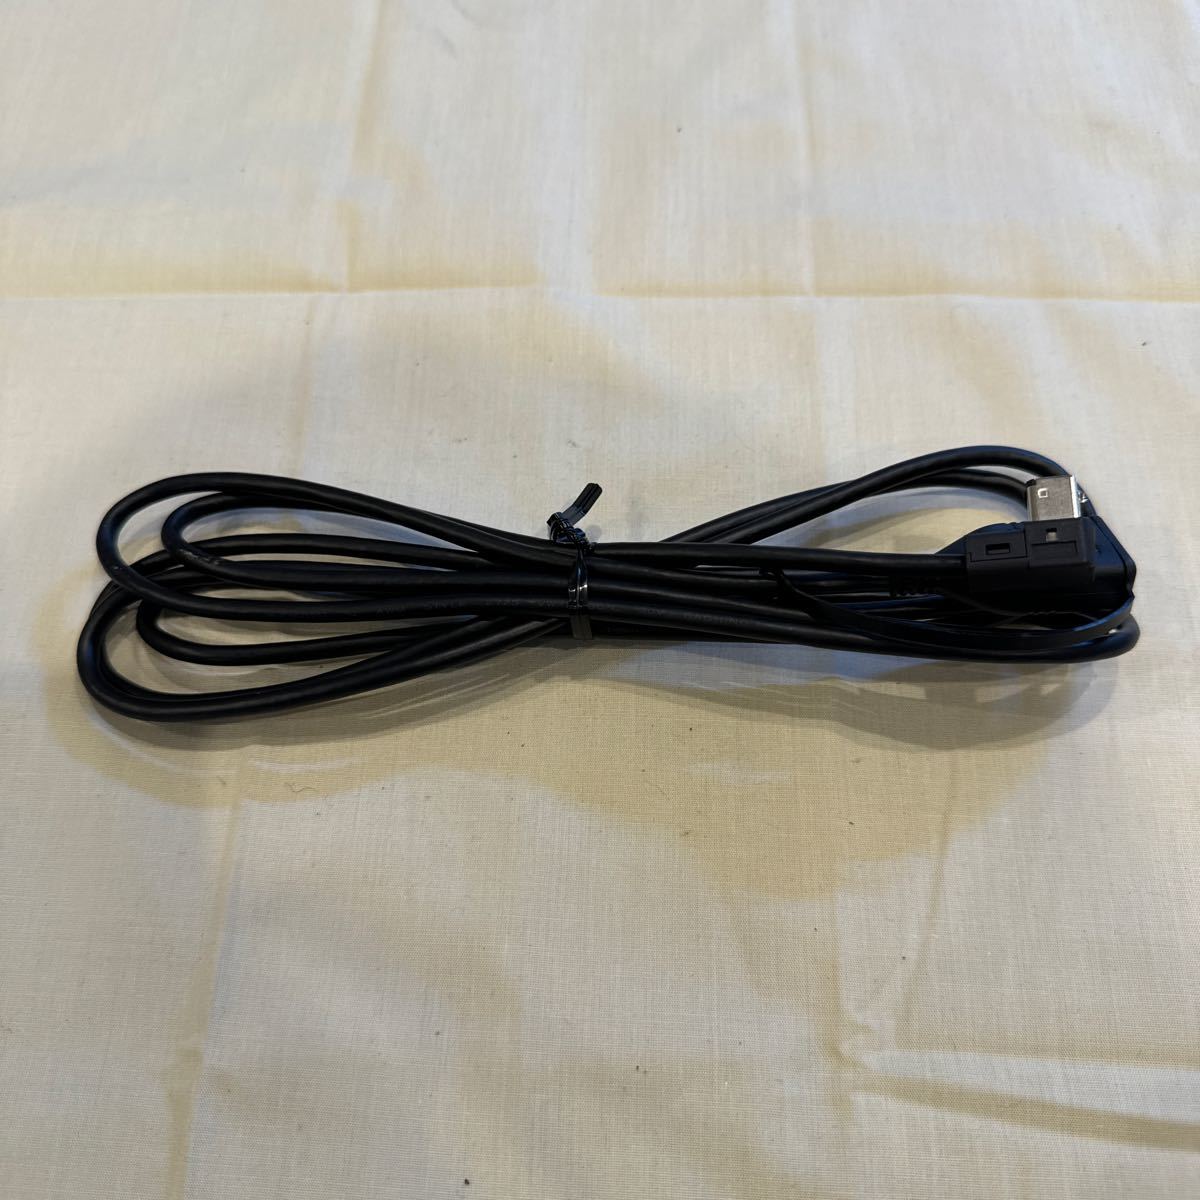  postage included! Suzuki Mazda original navigation Panasonic 4 pin iPod iPhone USB connection cable code CN-RZ K1HY04YY0105